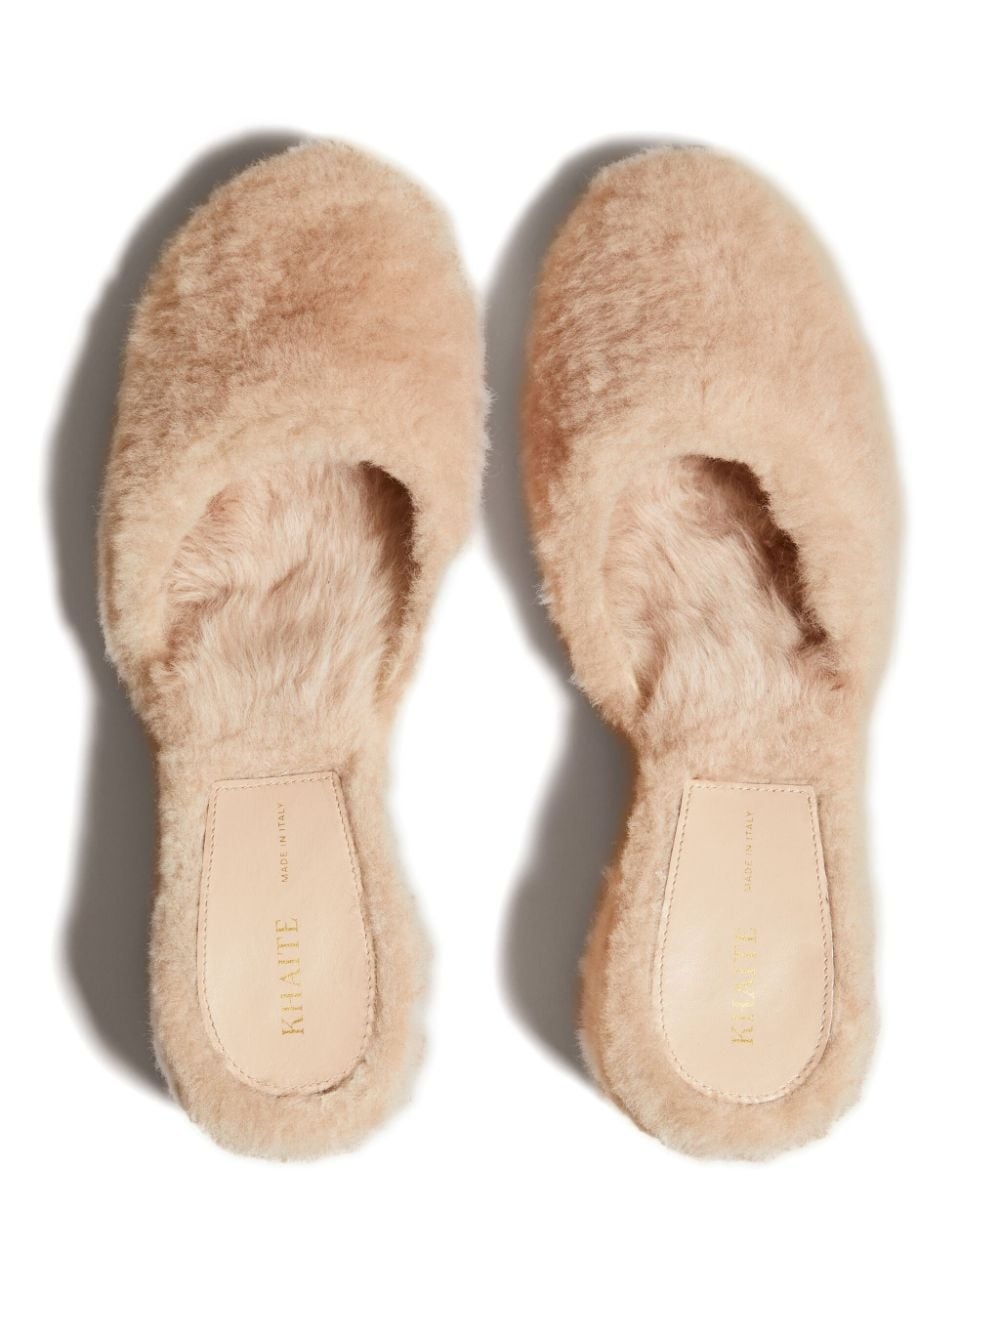 Clio 50mm shearling mules - 3